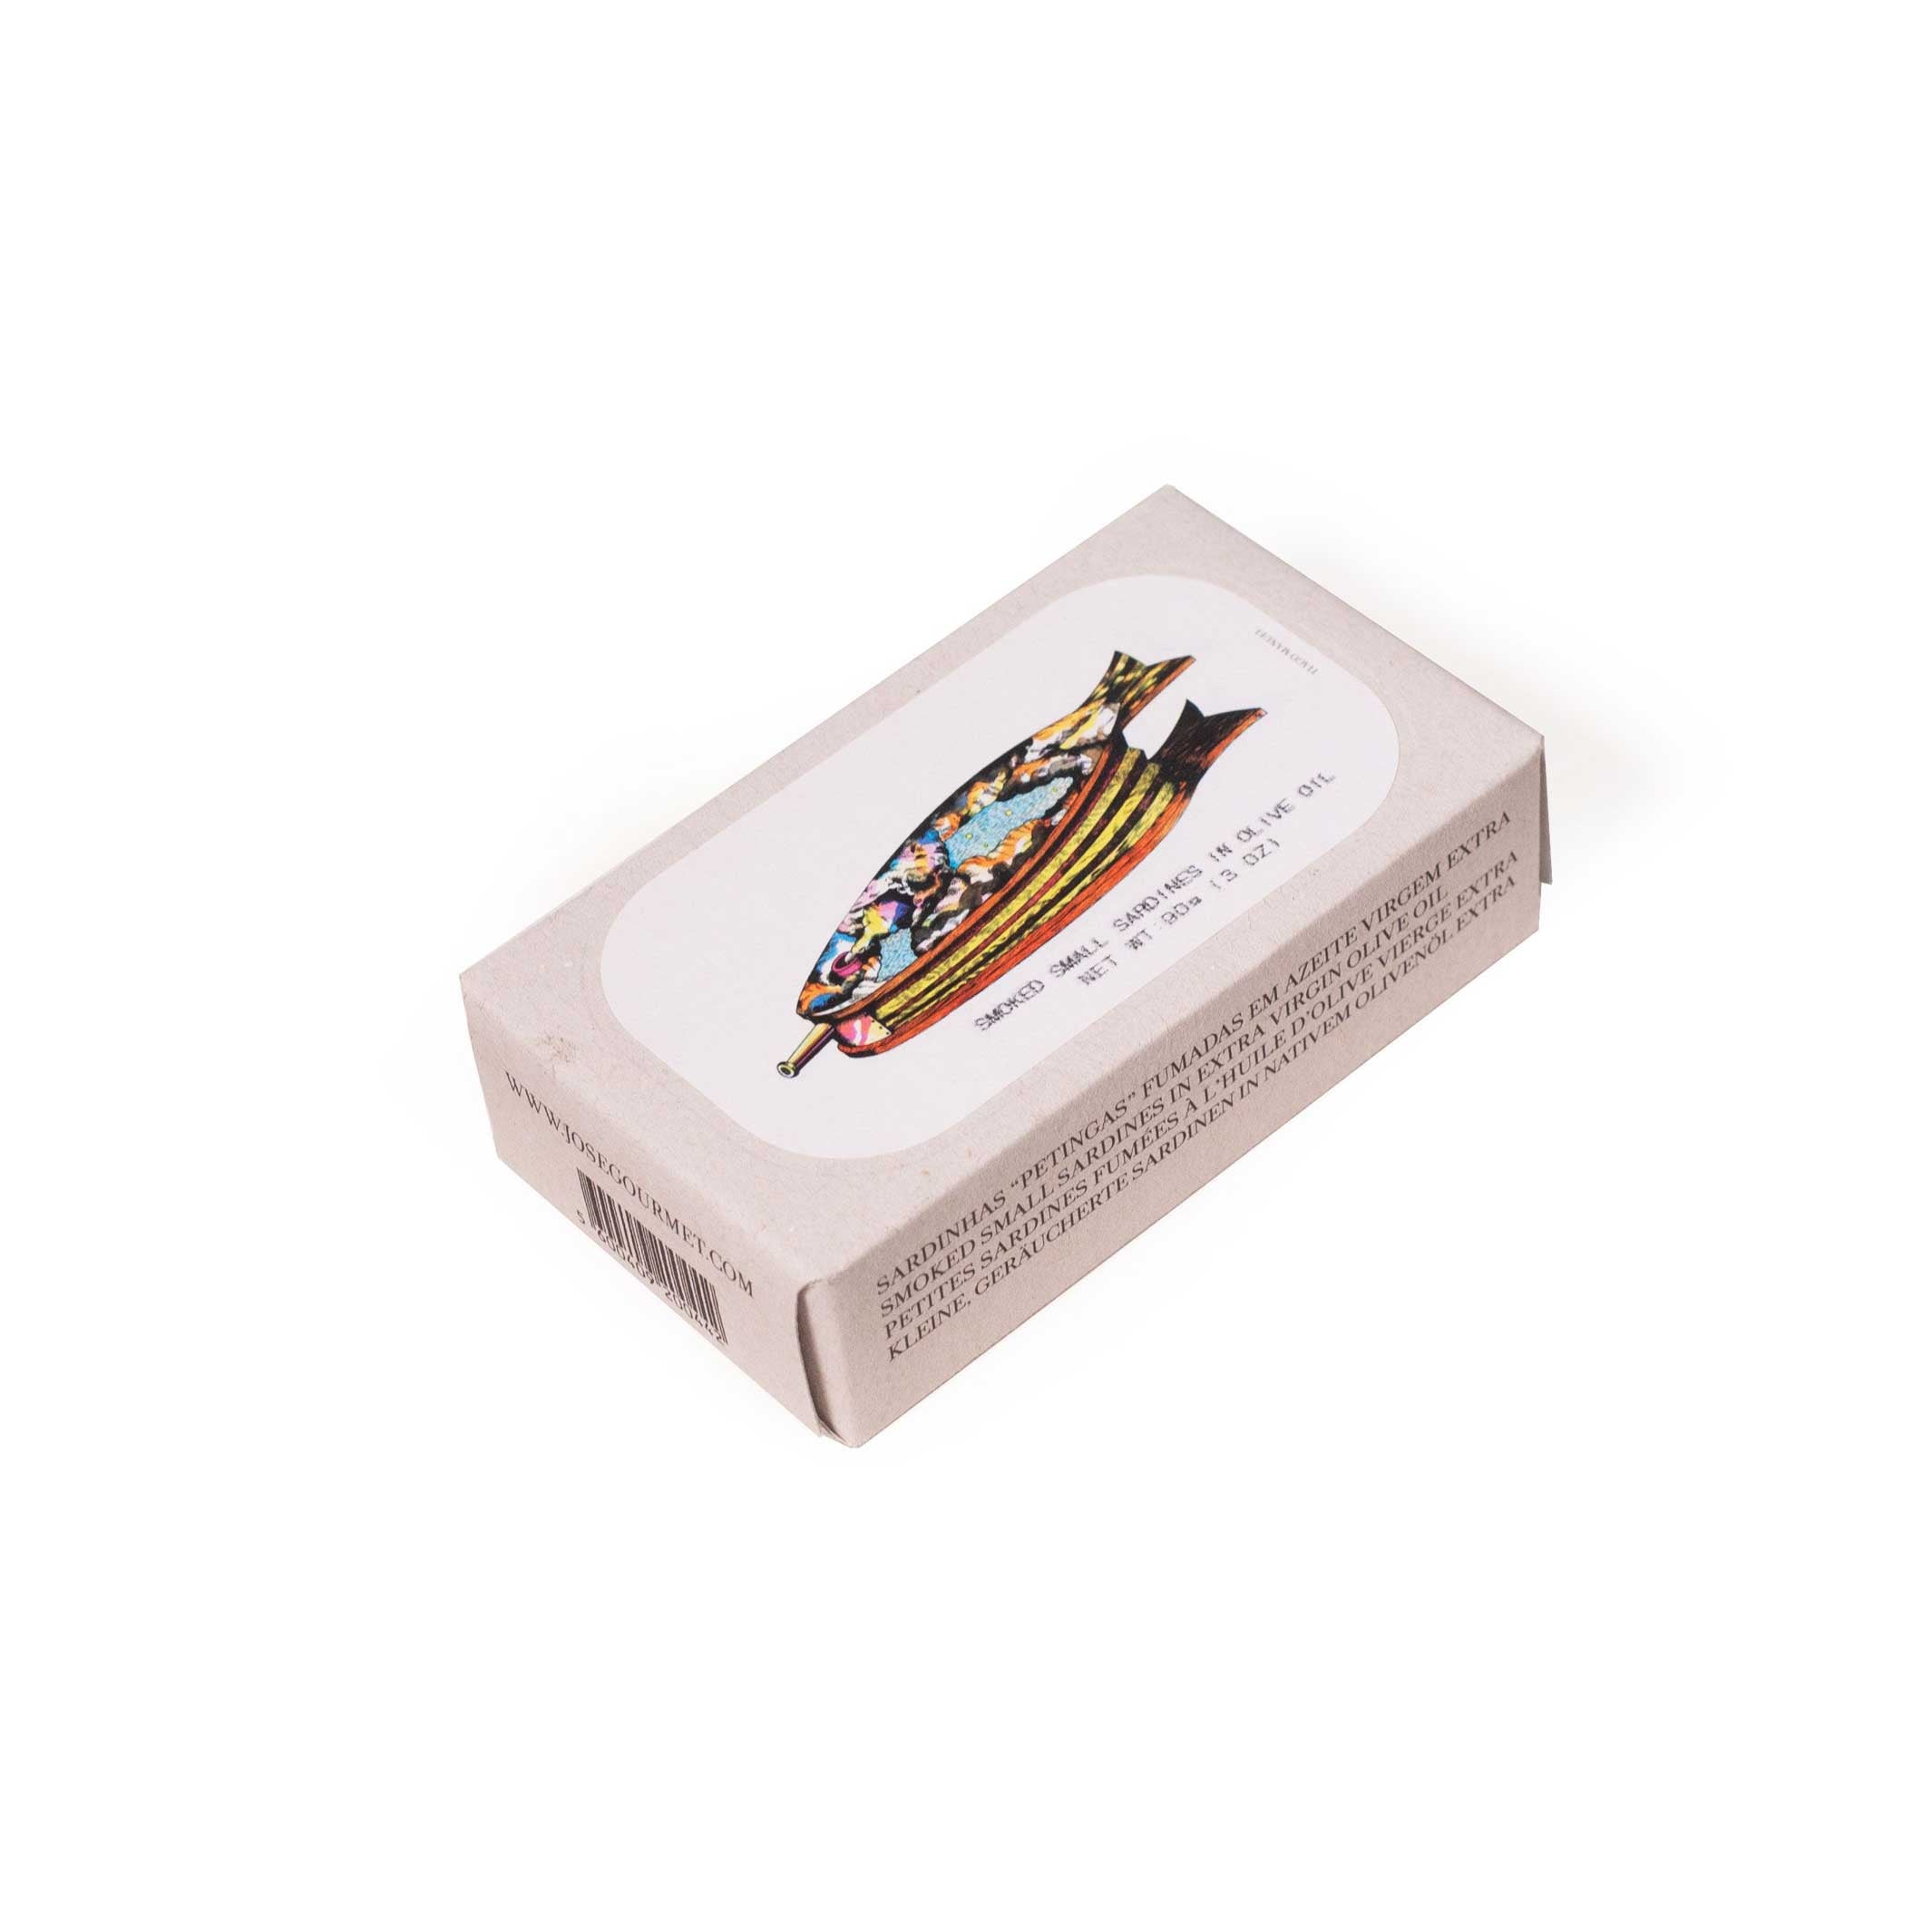 Smoked small SARDINES in Extra Virgin Olive Oil | CANNED GOURMET FISH | 90 g | José Gourmet